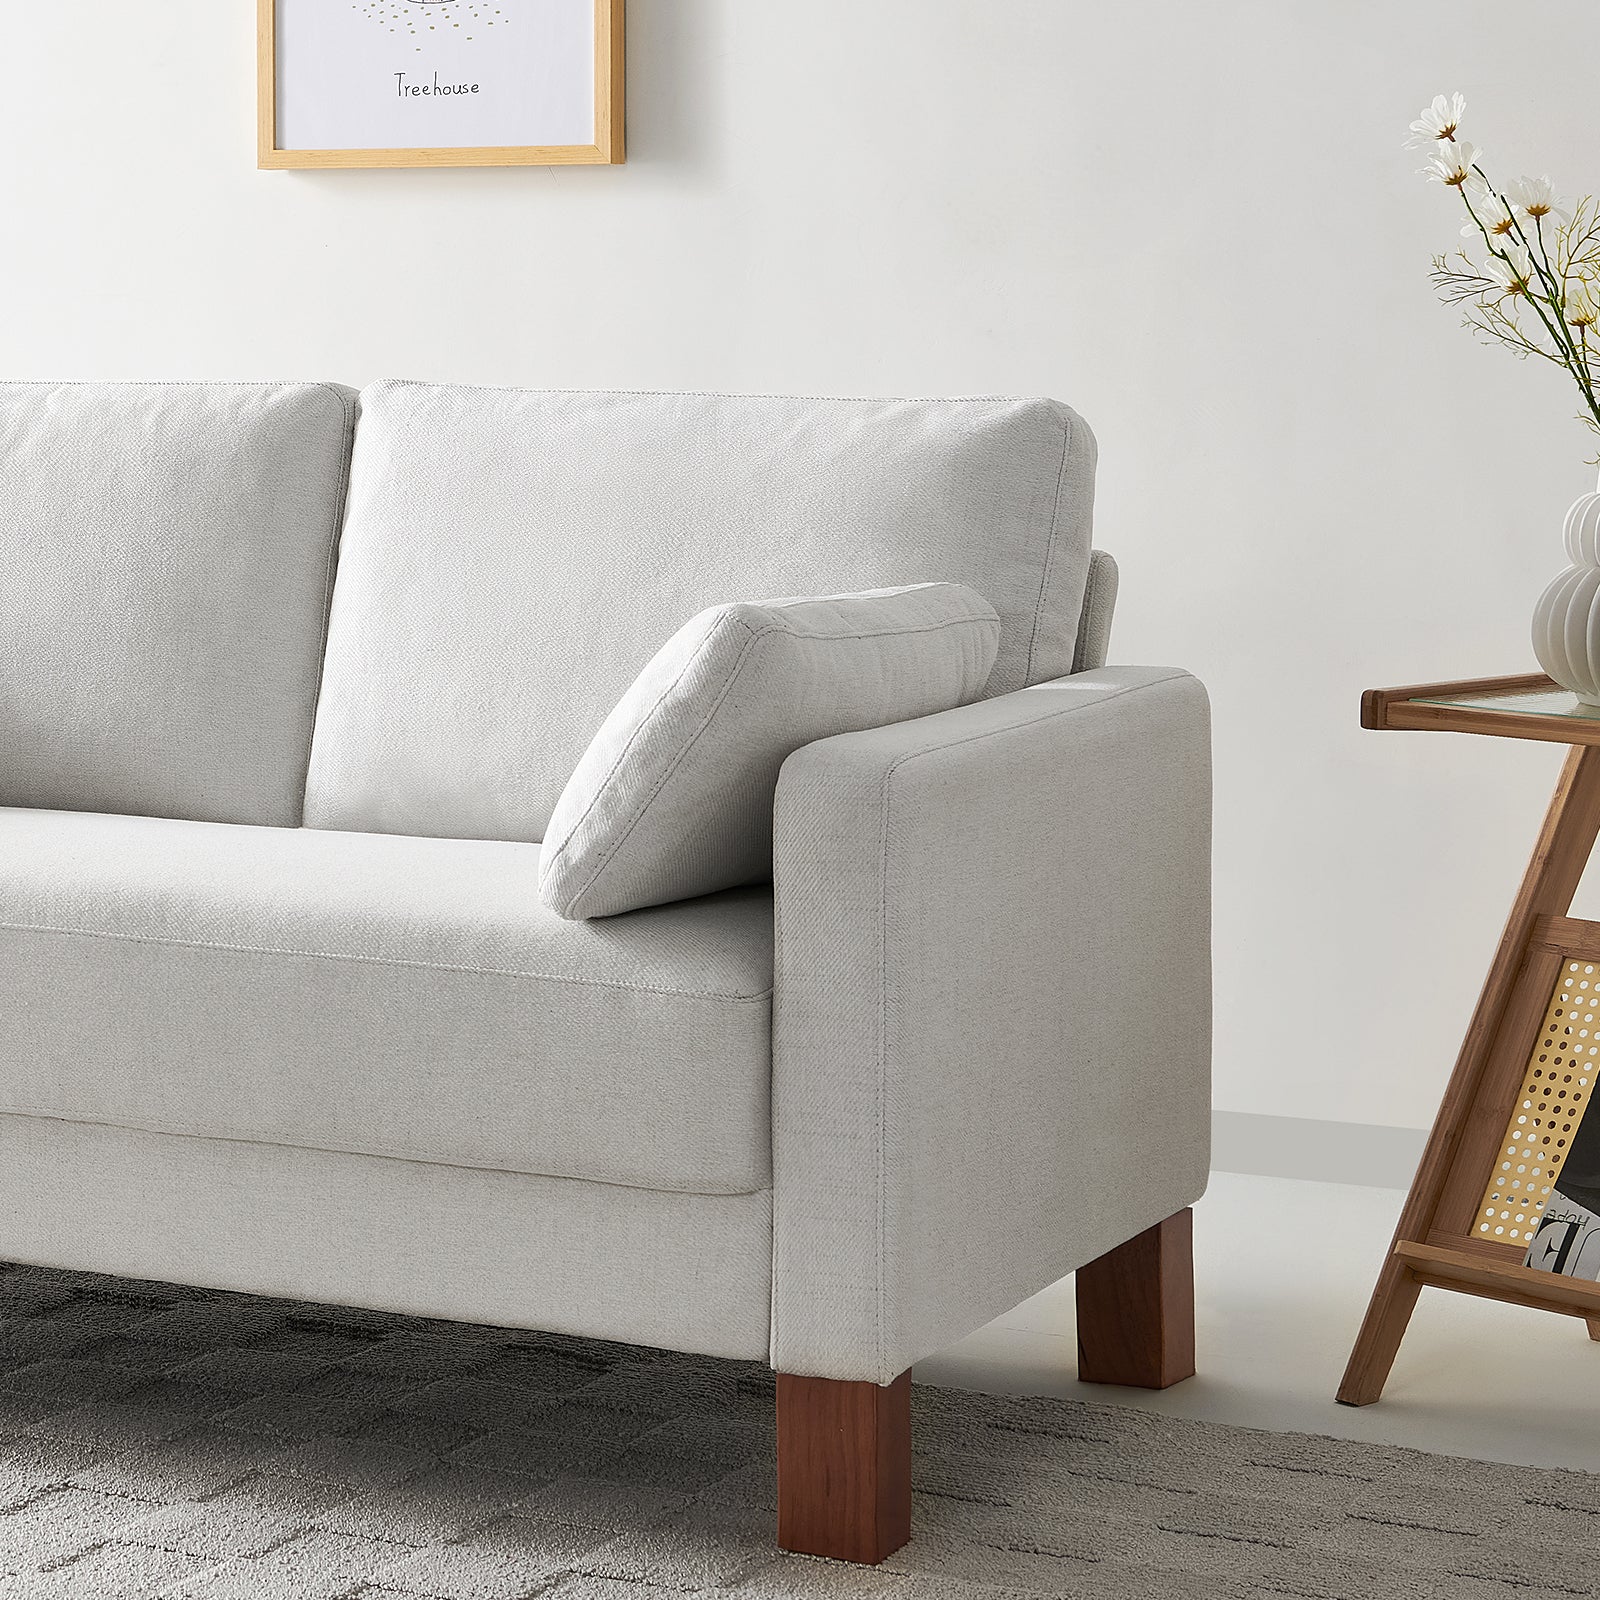 Serena Sofa, Classic Fabric Loveseat with Thick Cushion and Wooden Legs, White, 56'', 66'' or set